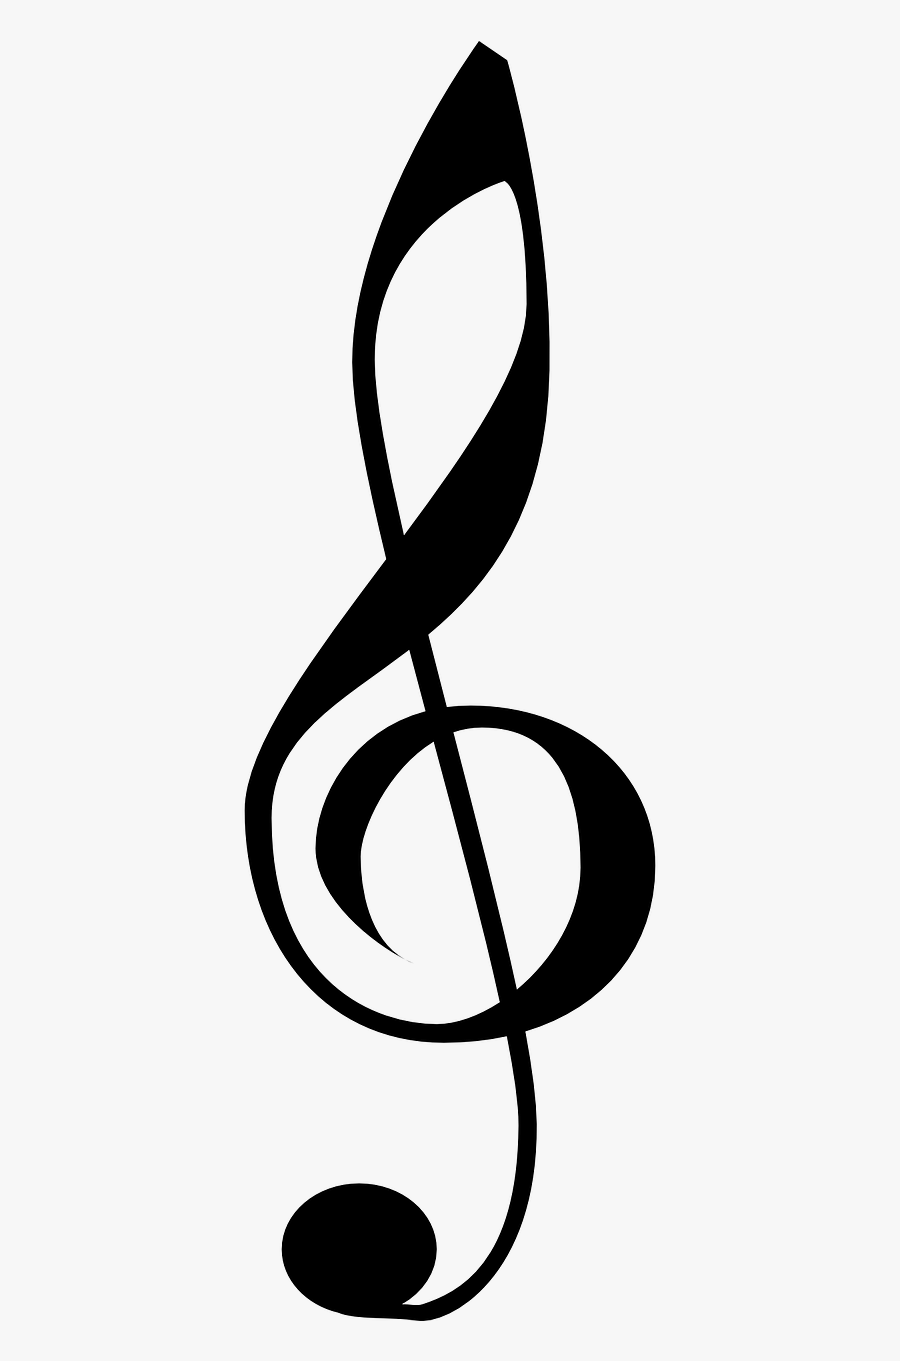 Musical Note Symbol - Treble Clef Vector Png, Transparent Clipart